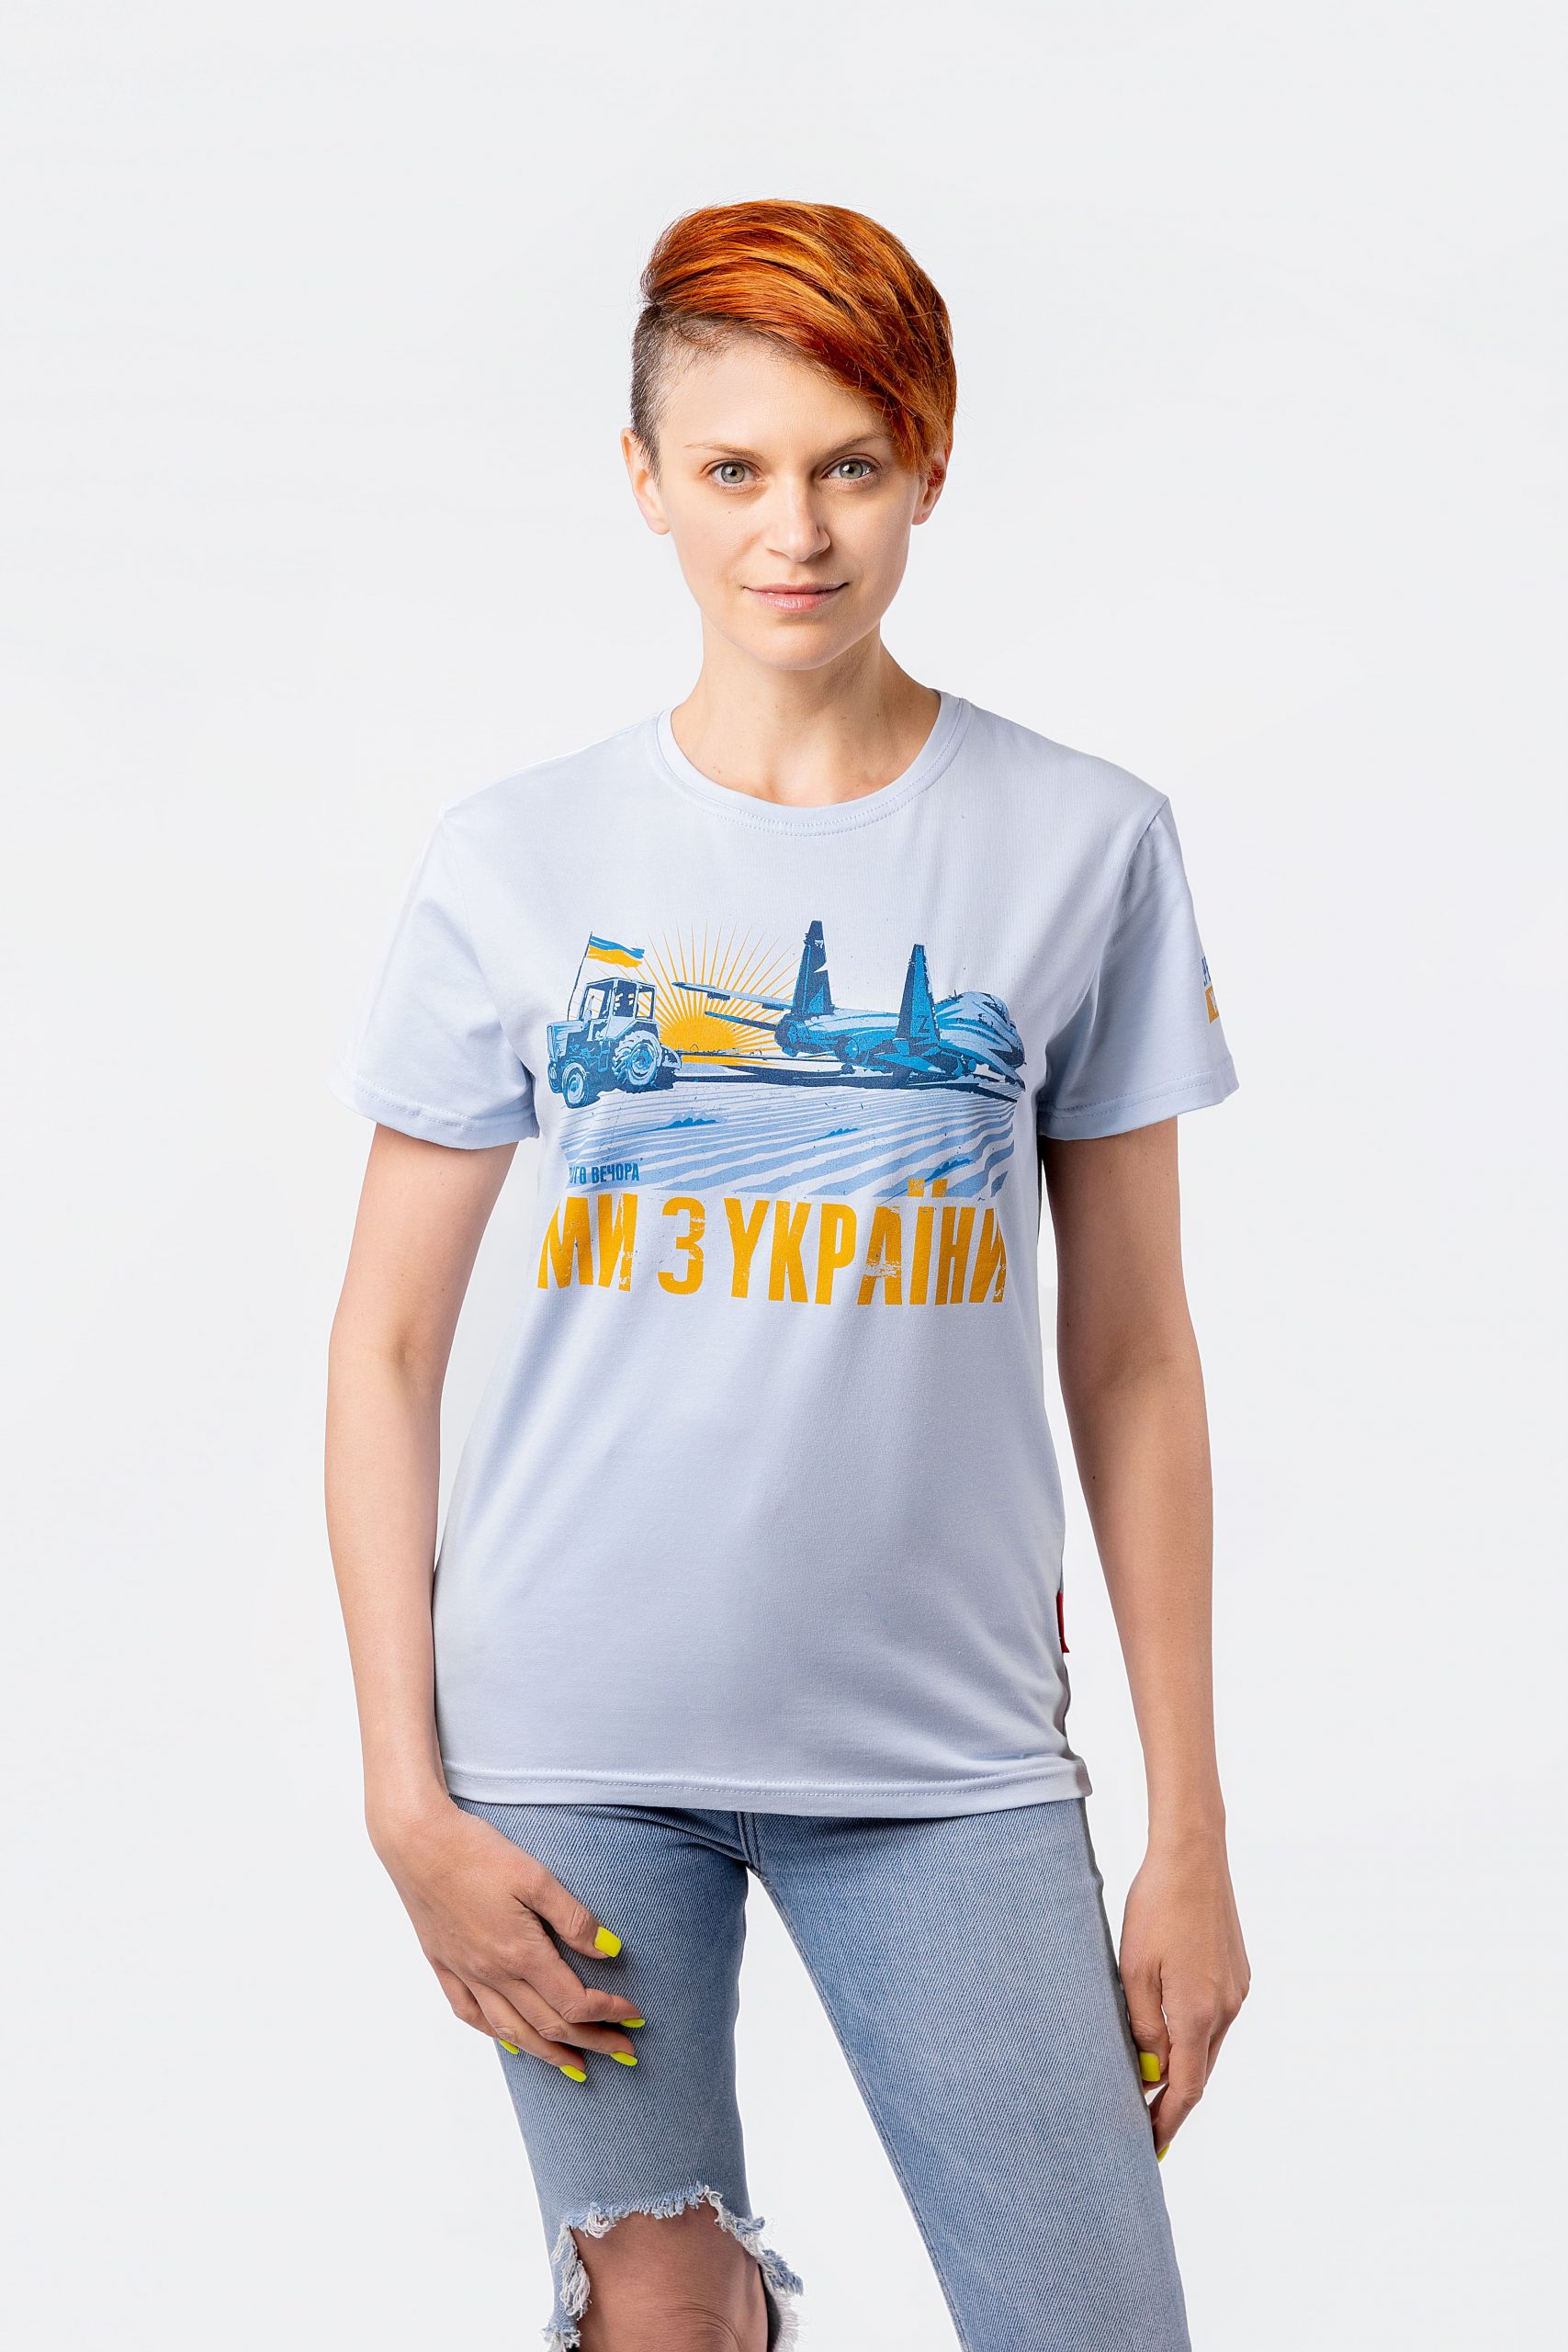 Women's T-Shirt We Are From Ukraine.а. Color light blue. .